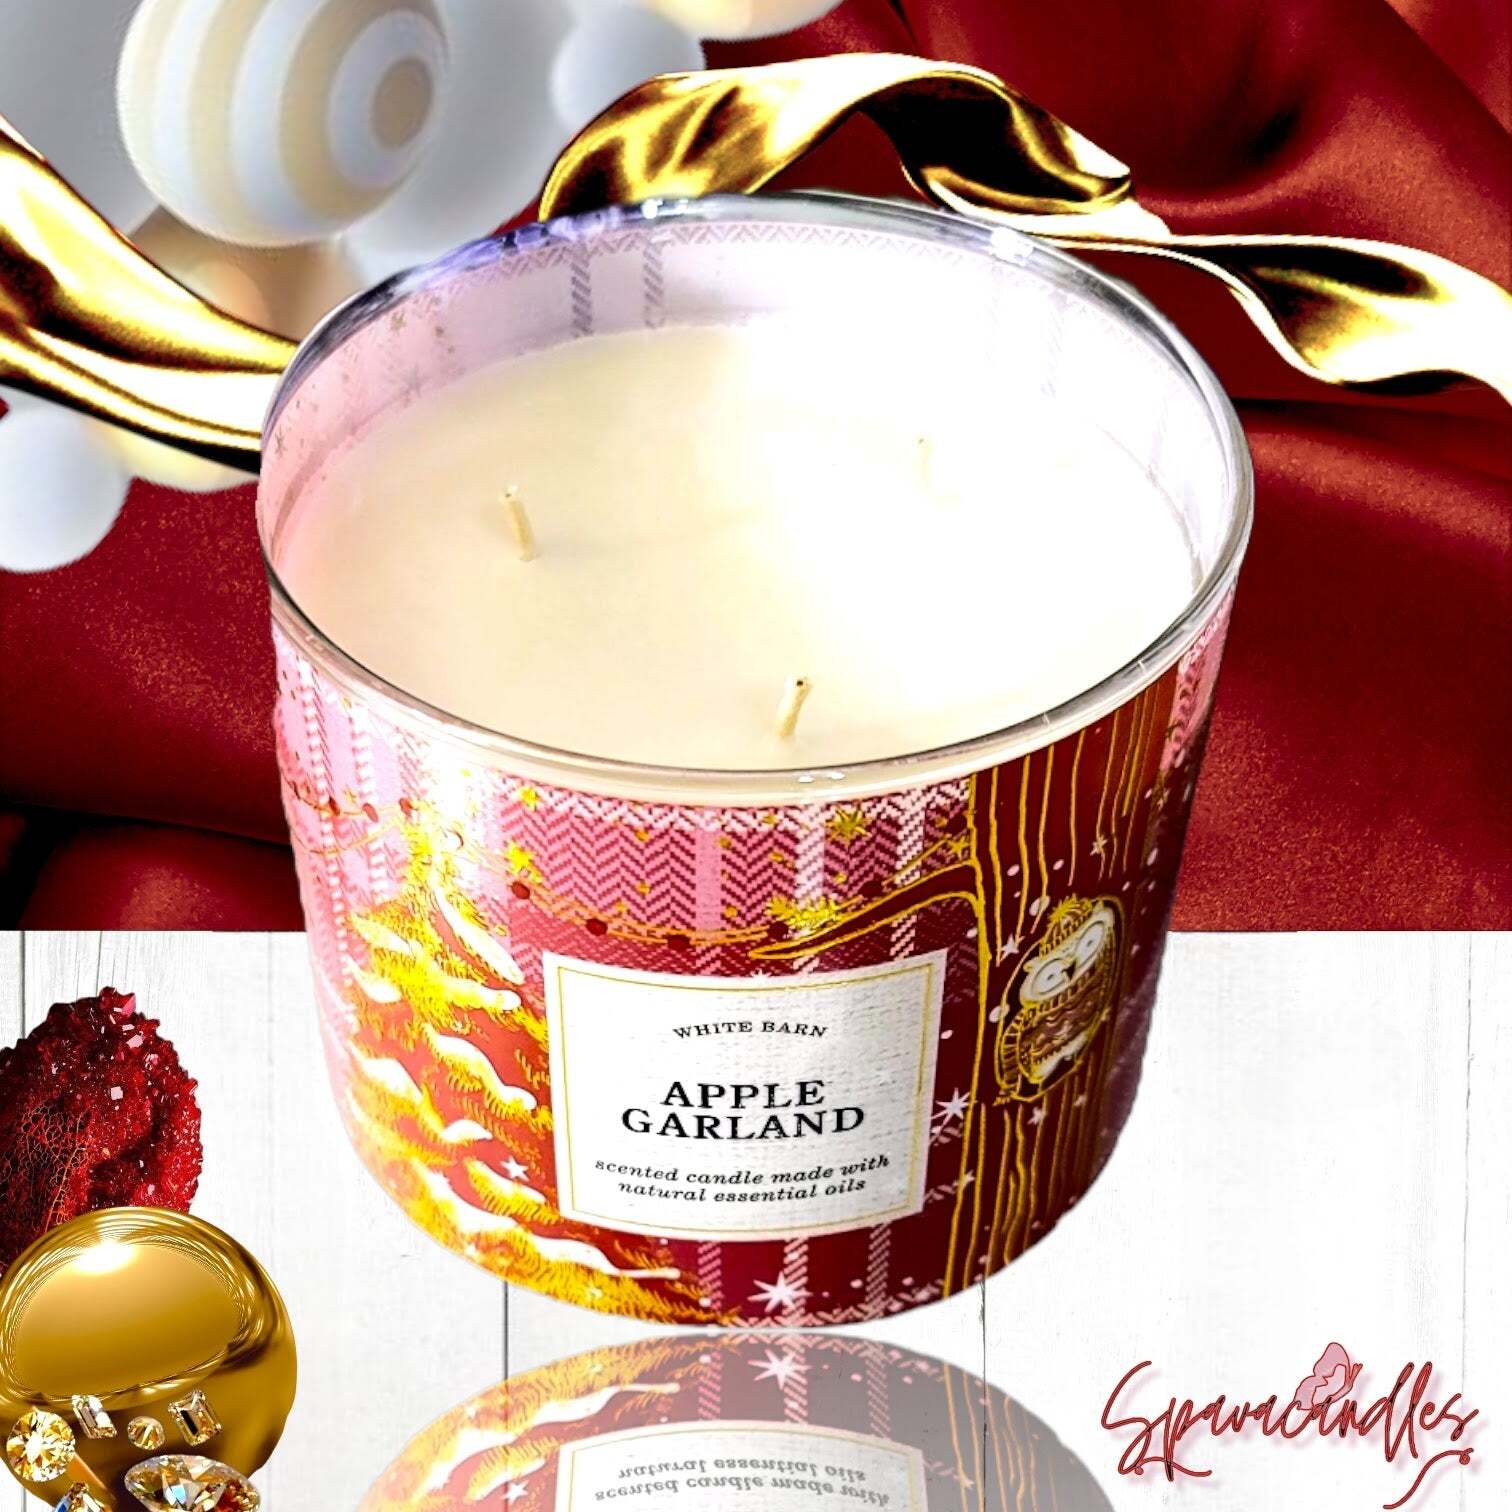 Apple Garland 3 Wick Candle